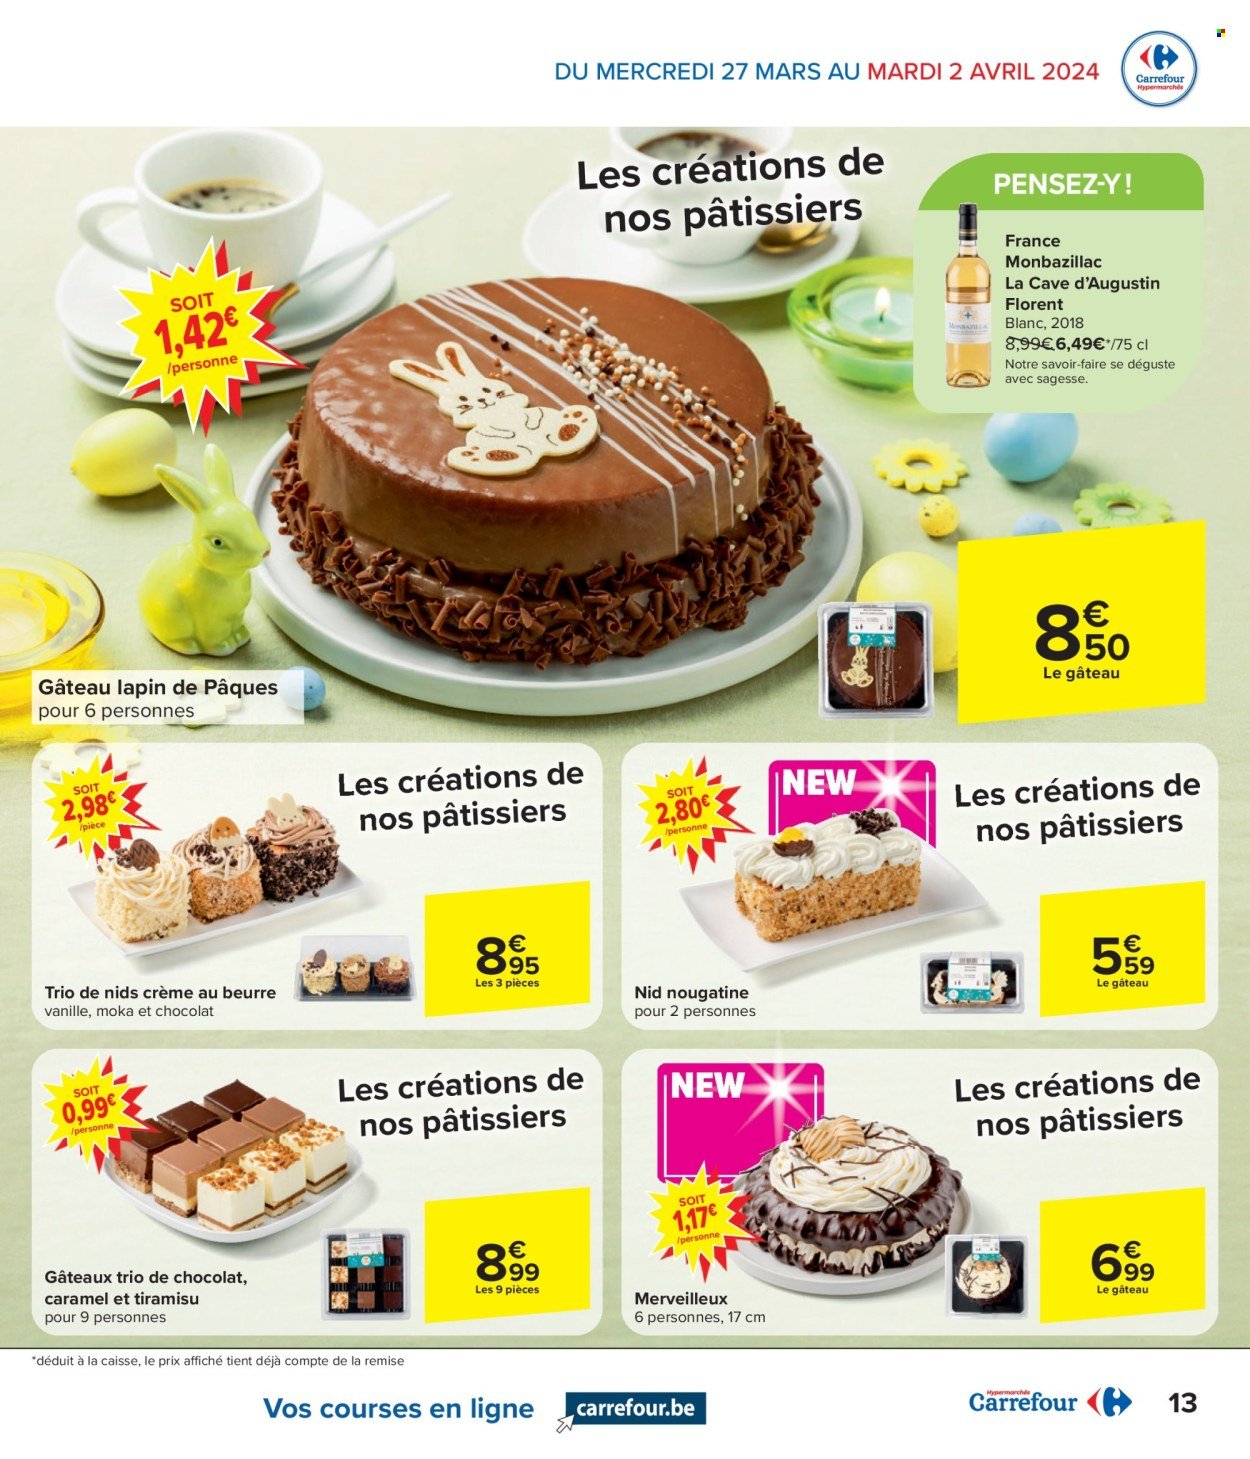 Catalogue Carrefour hypermarkt - 27.3.2024 - 8.4.2024. Page 13.